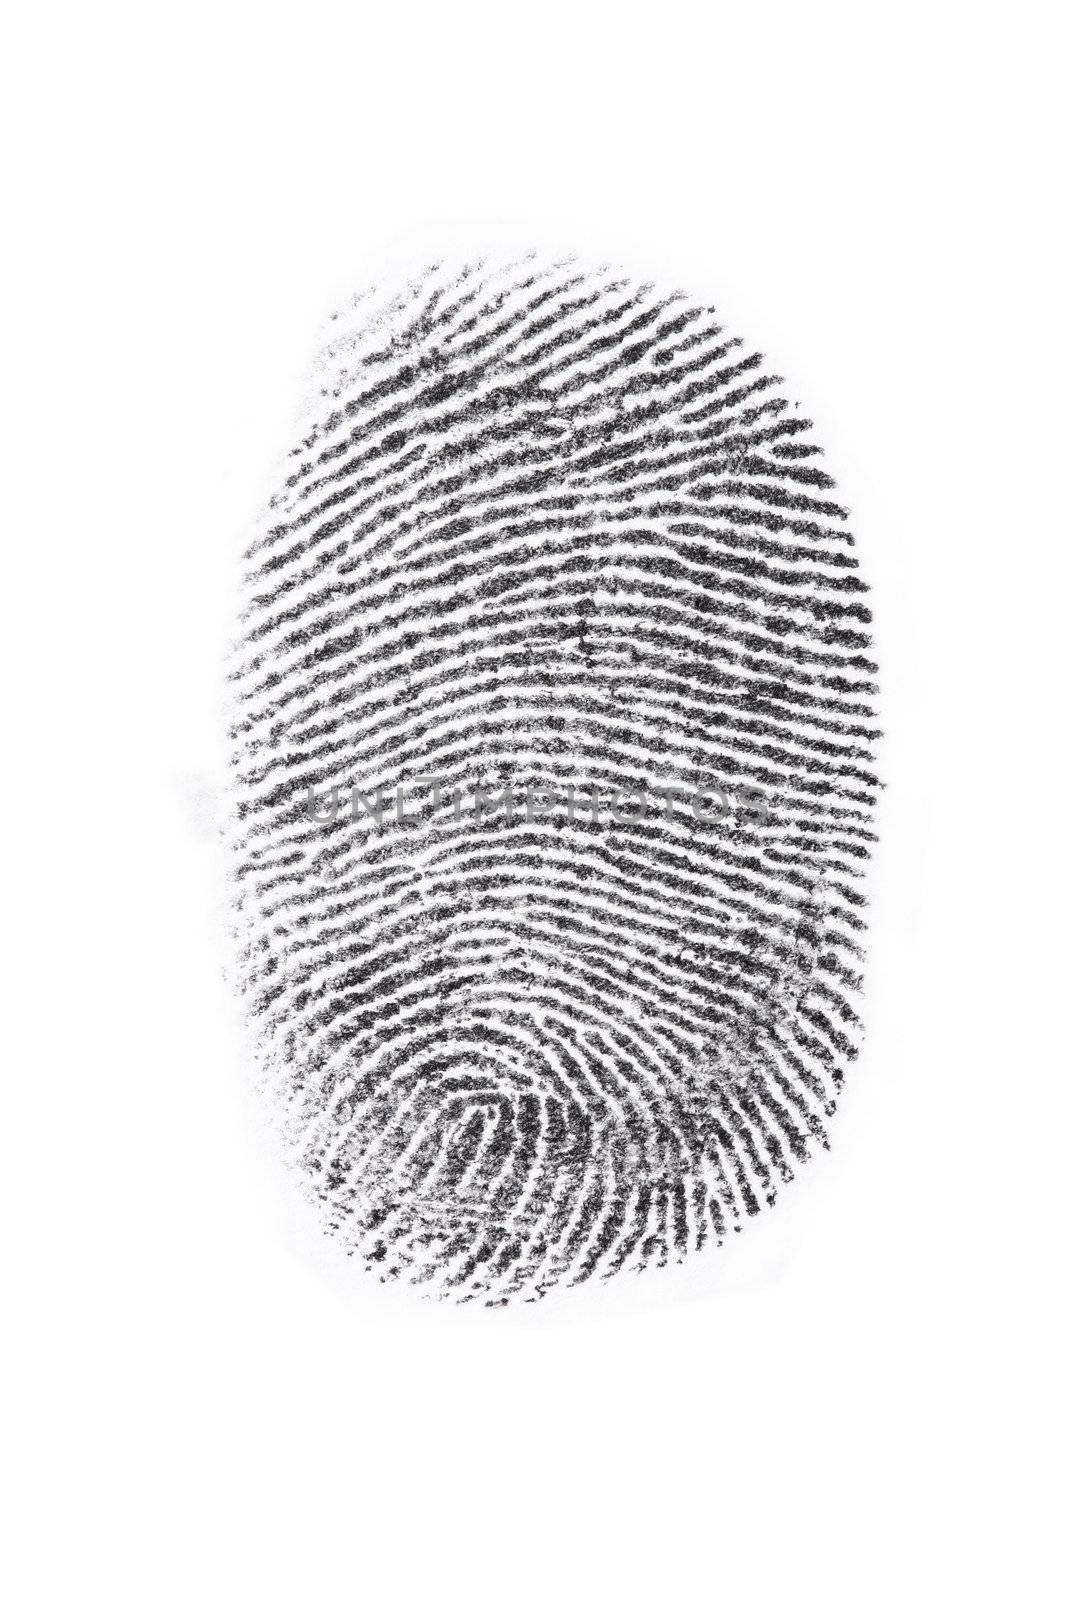 Fingerprint print output in a white background.